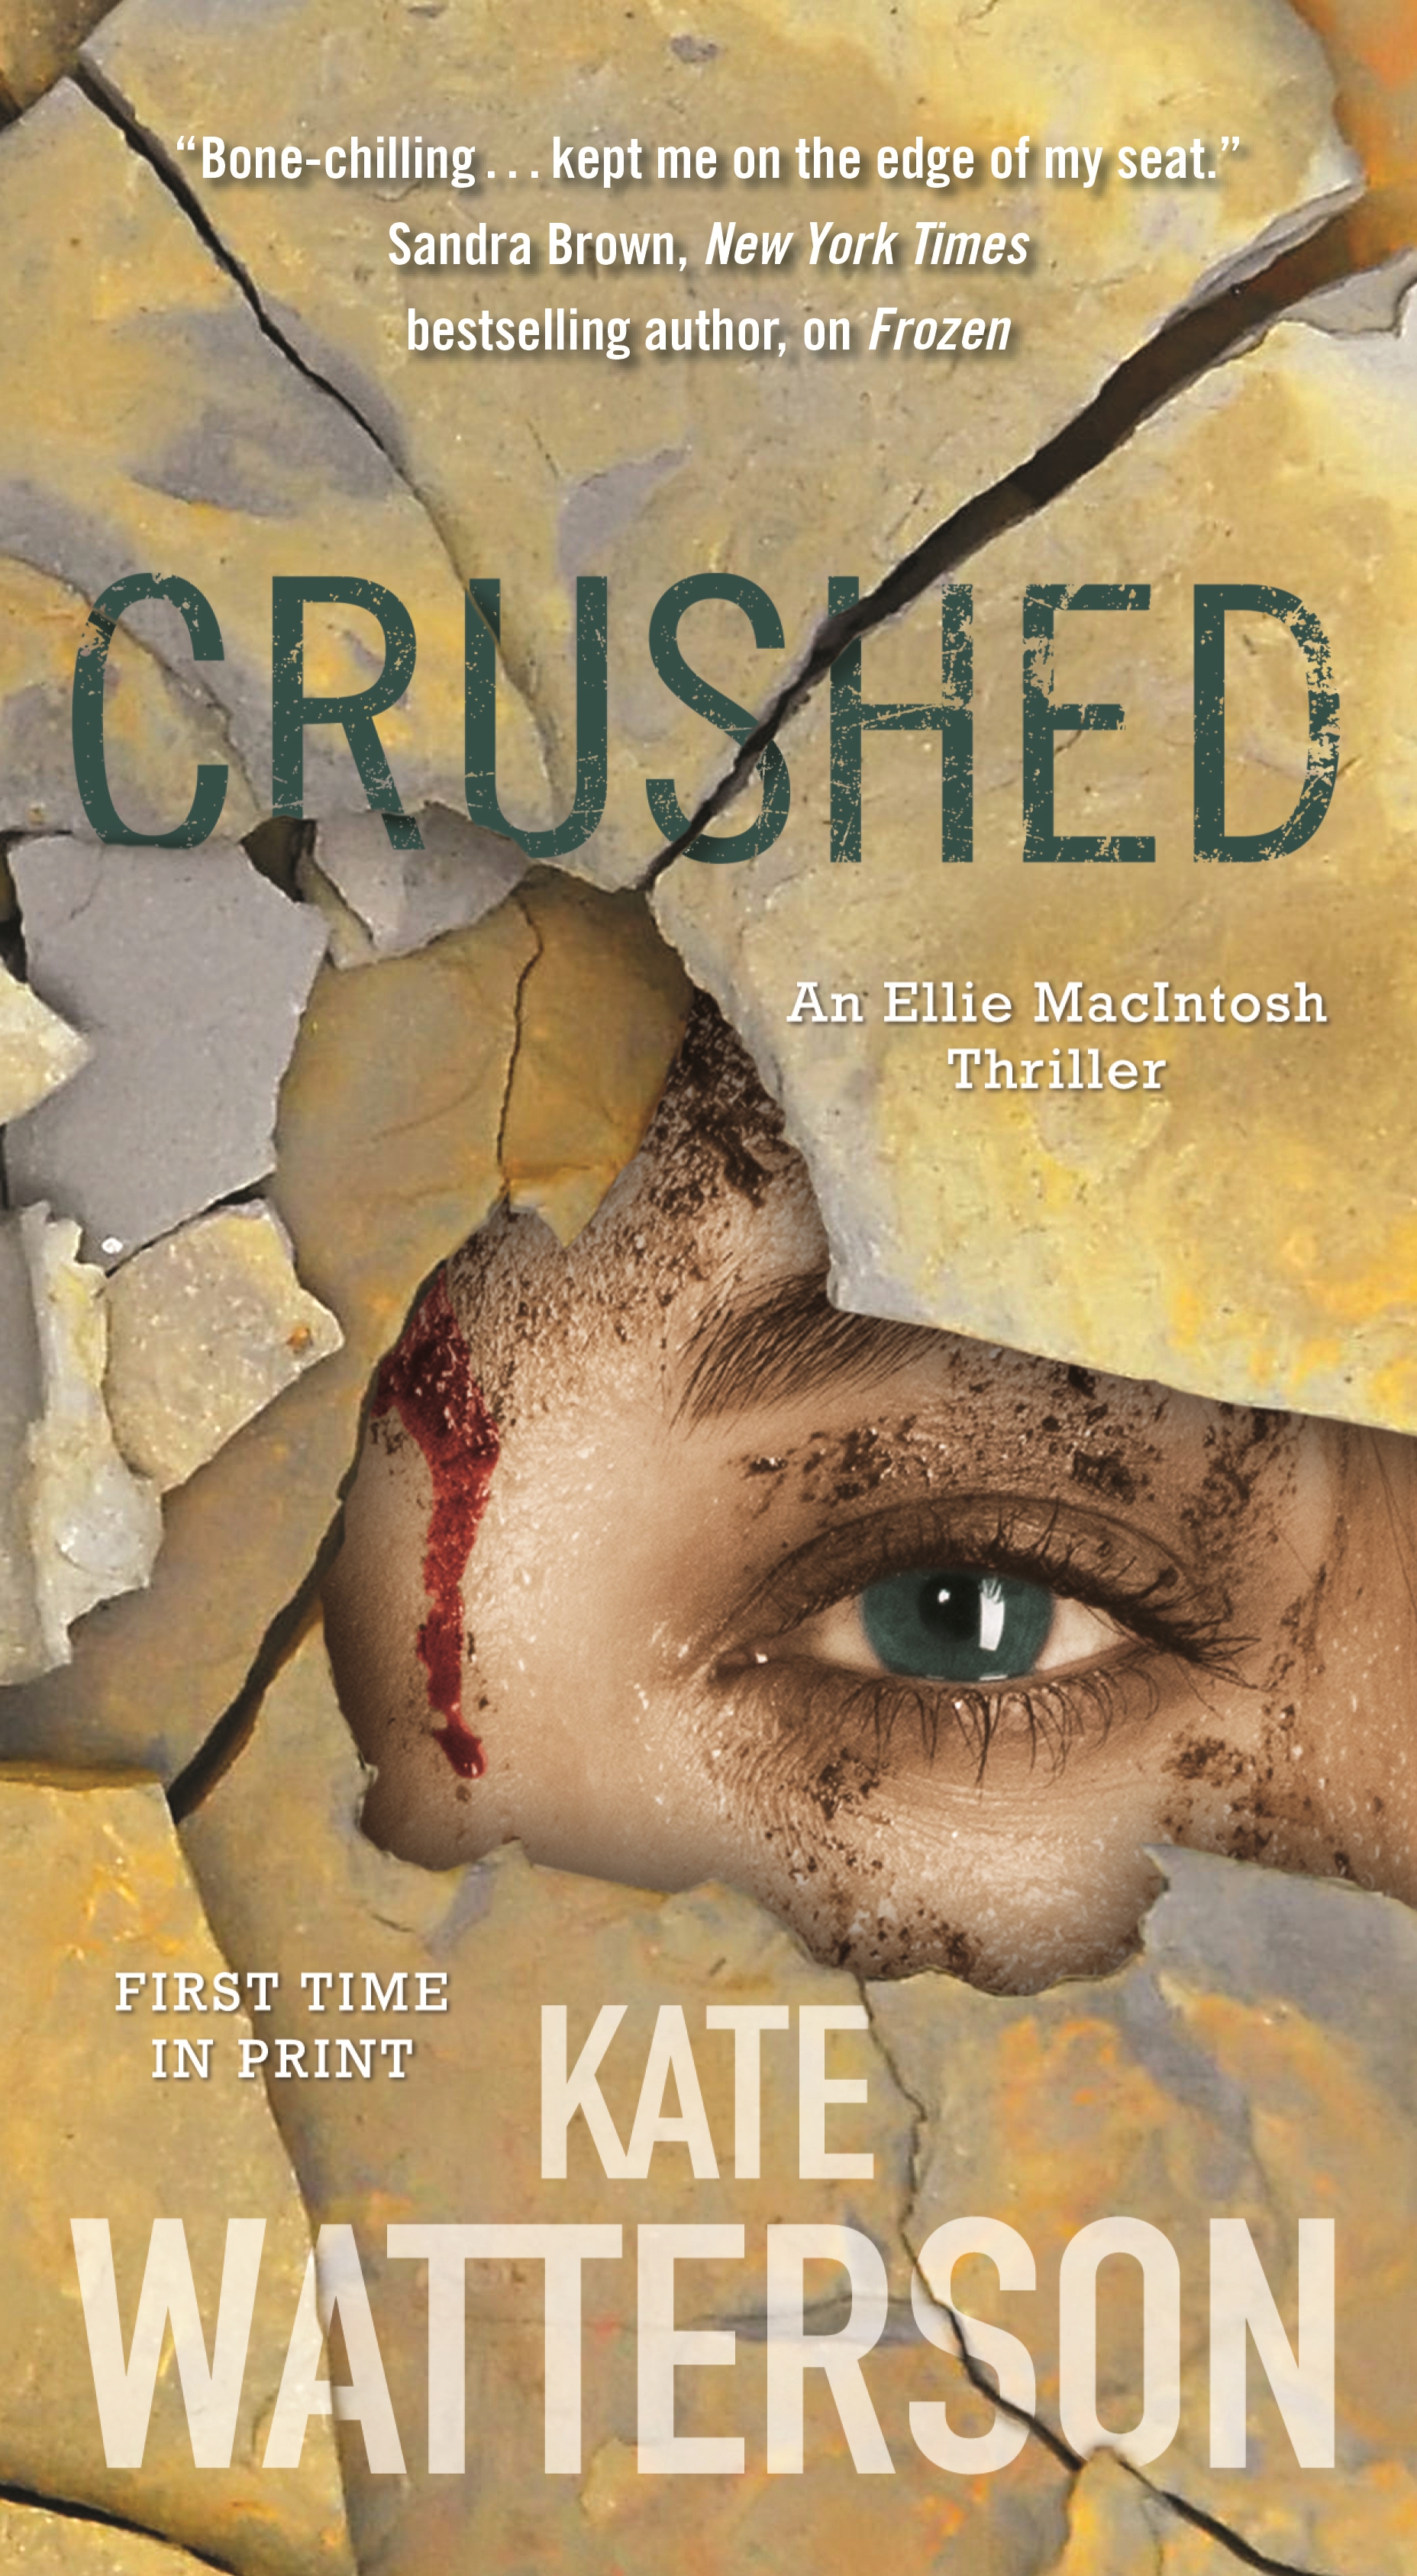 Crushed : An Ellie MacIntosh Thriller by Kate Watterson